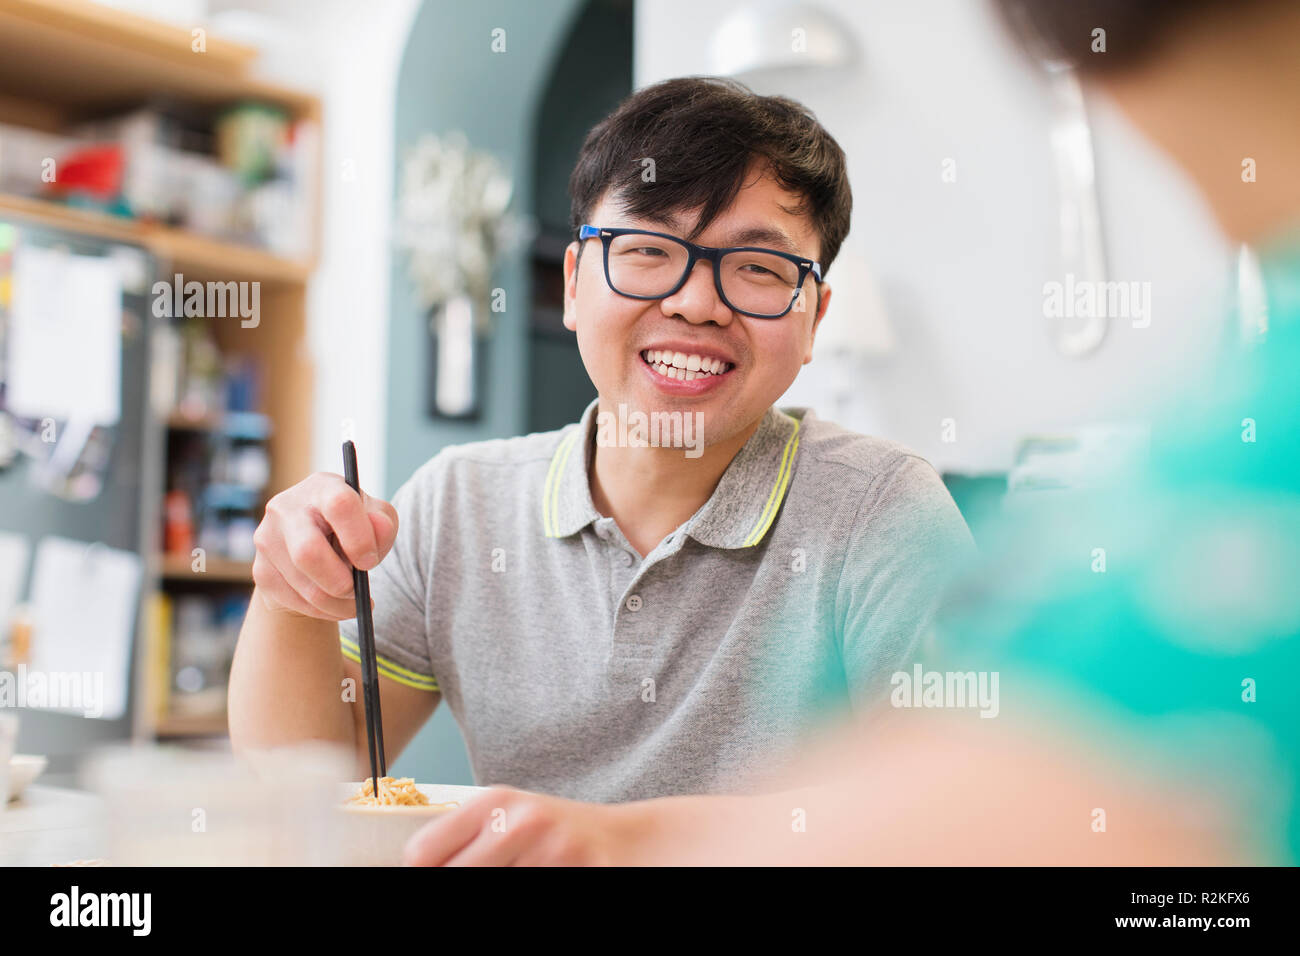 Happy man eating noodles with chopsticks Stock Photo